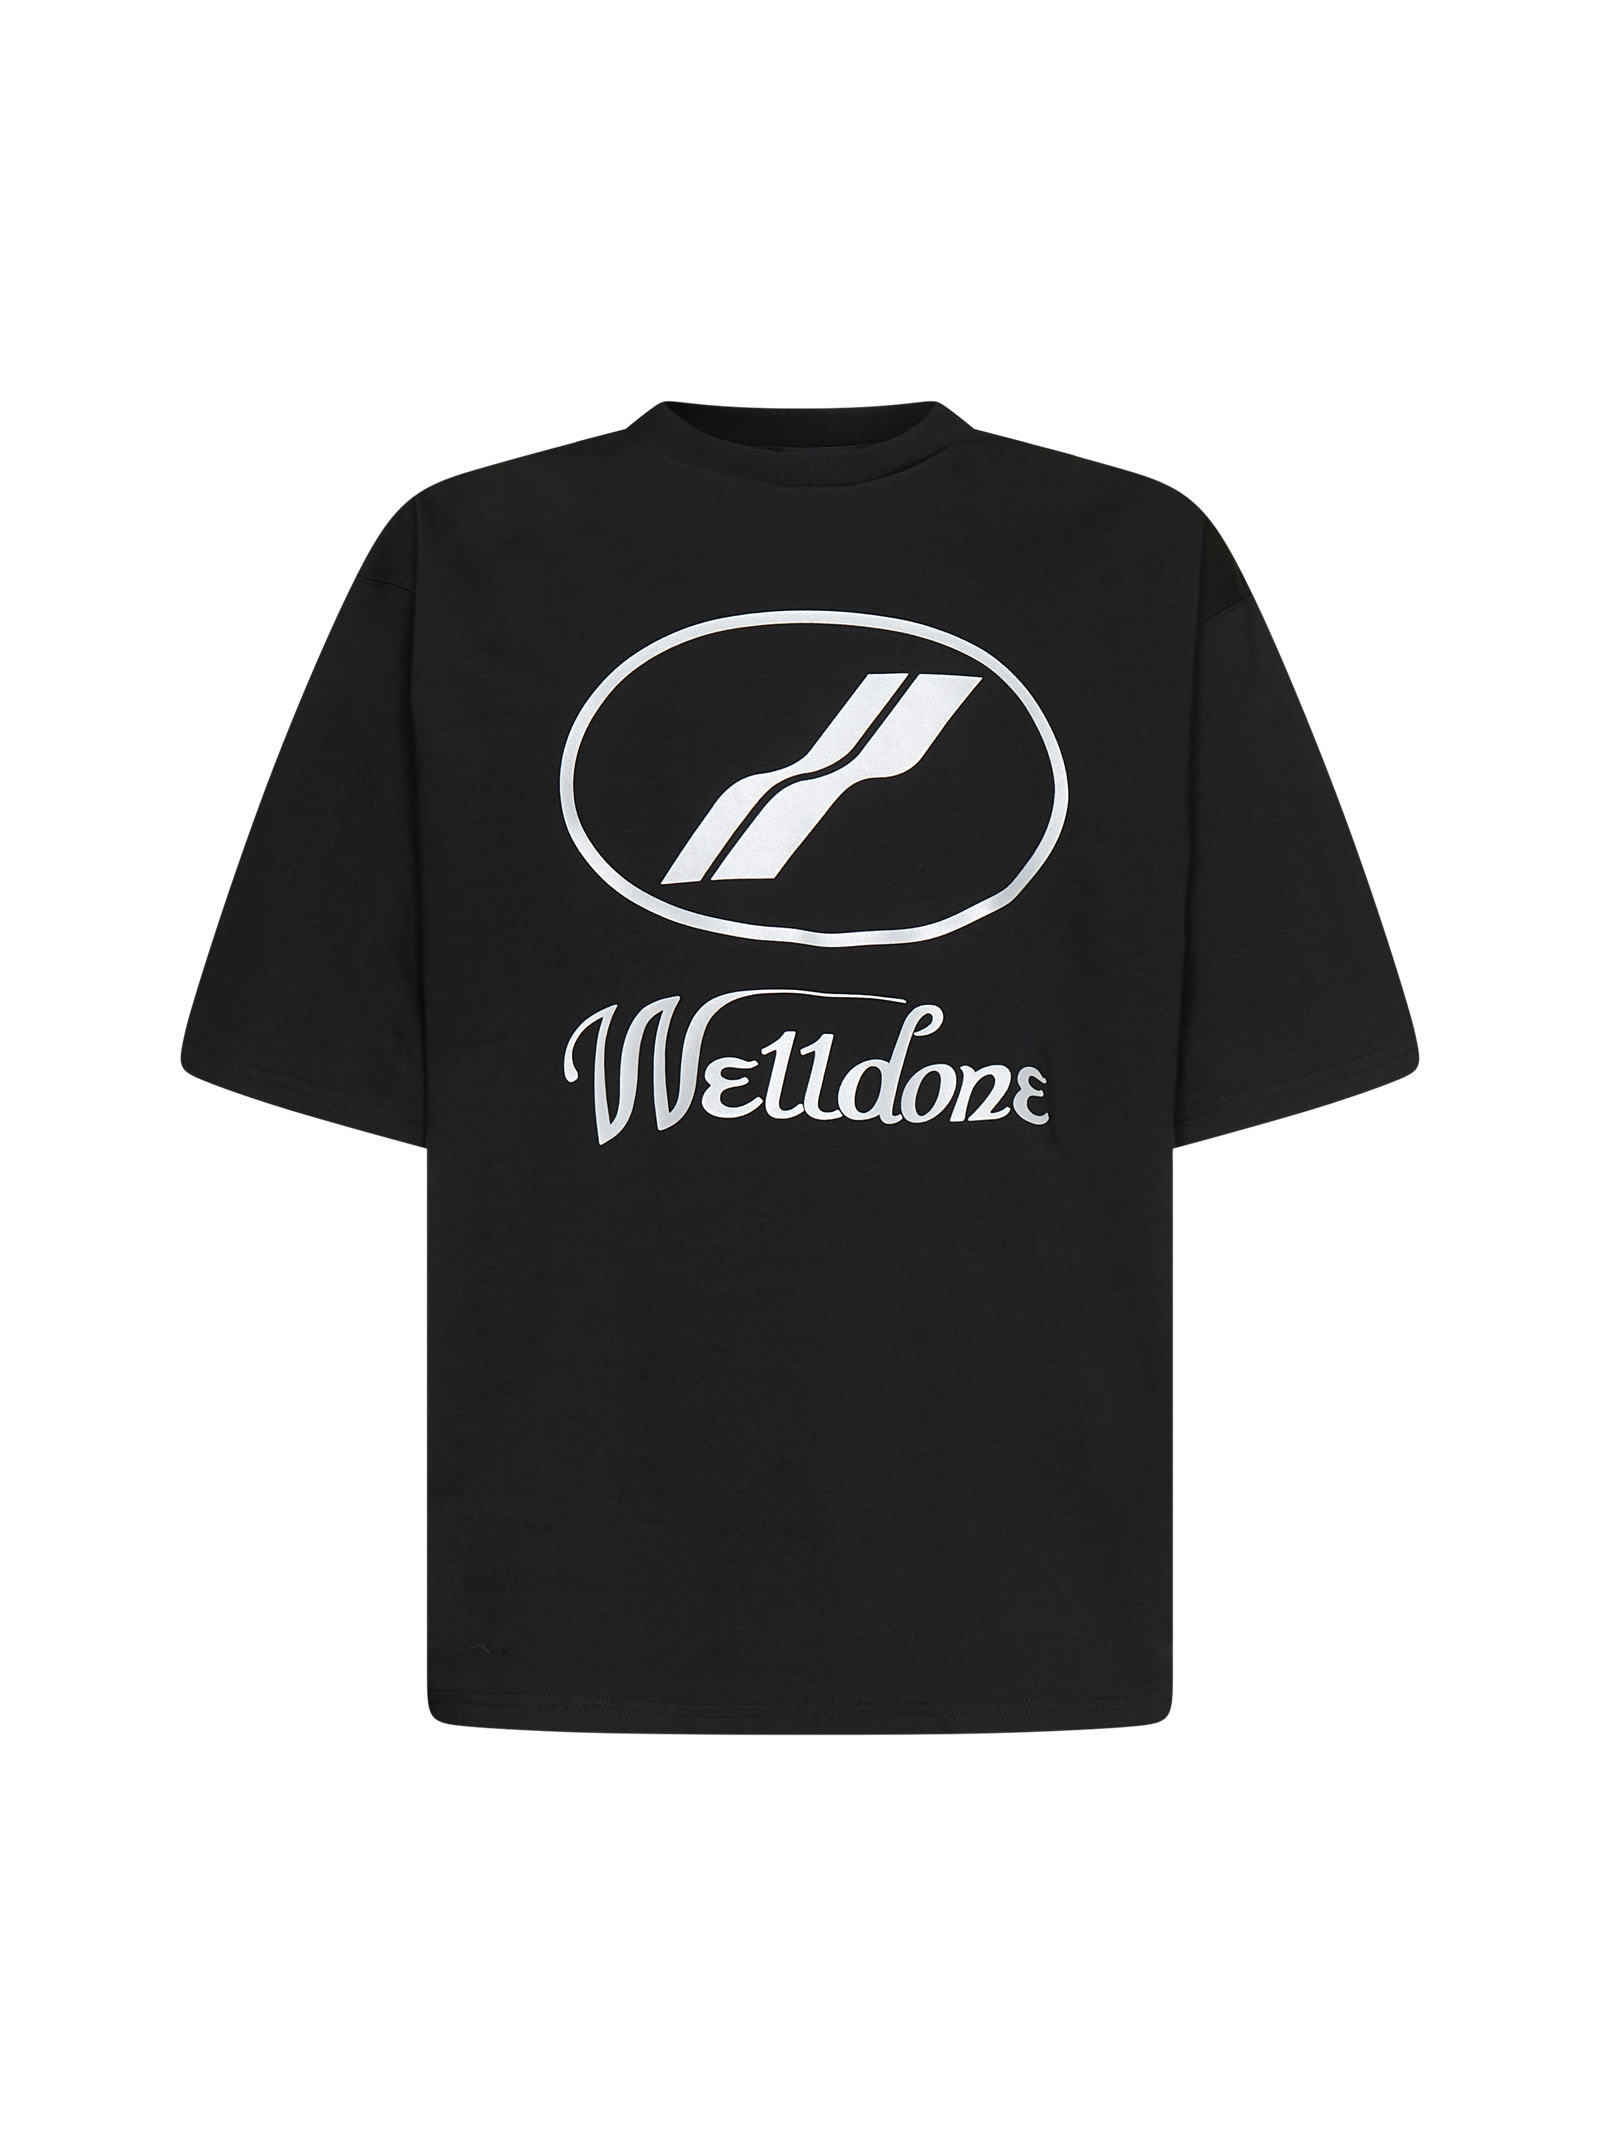 WE11 DONE T-SHIRT